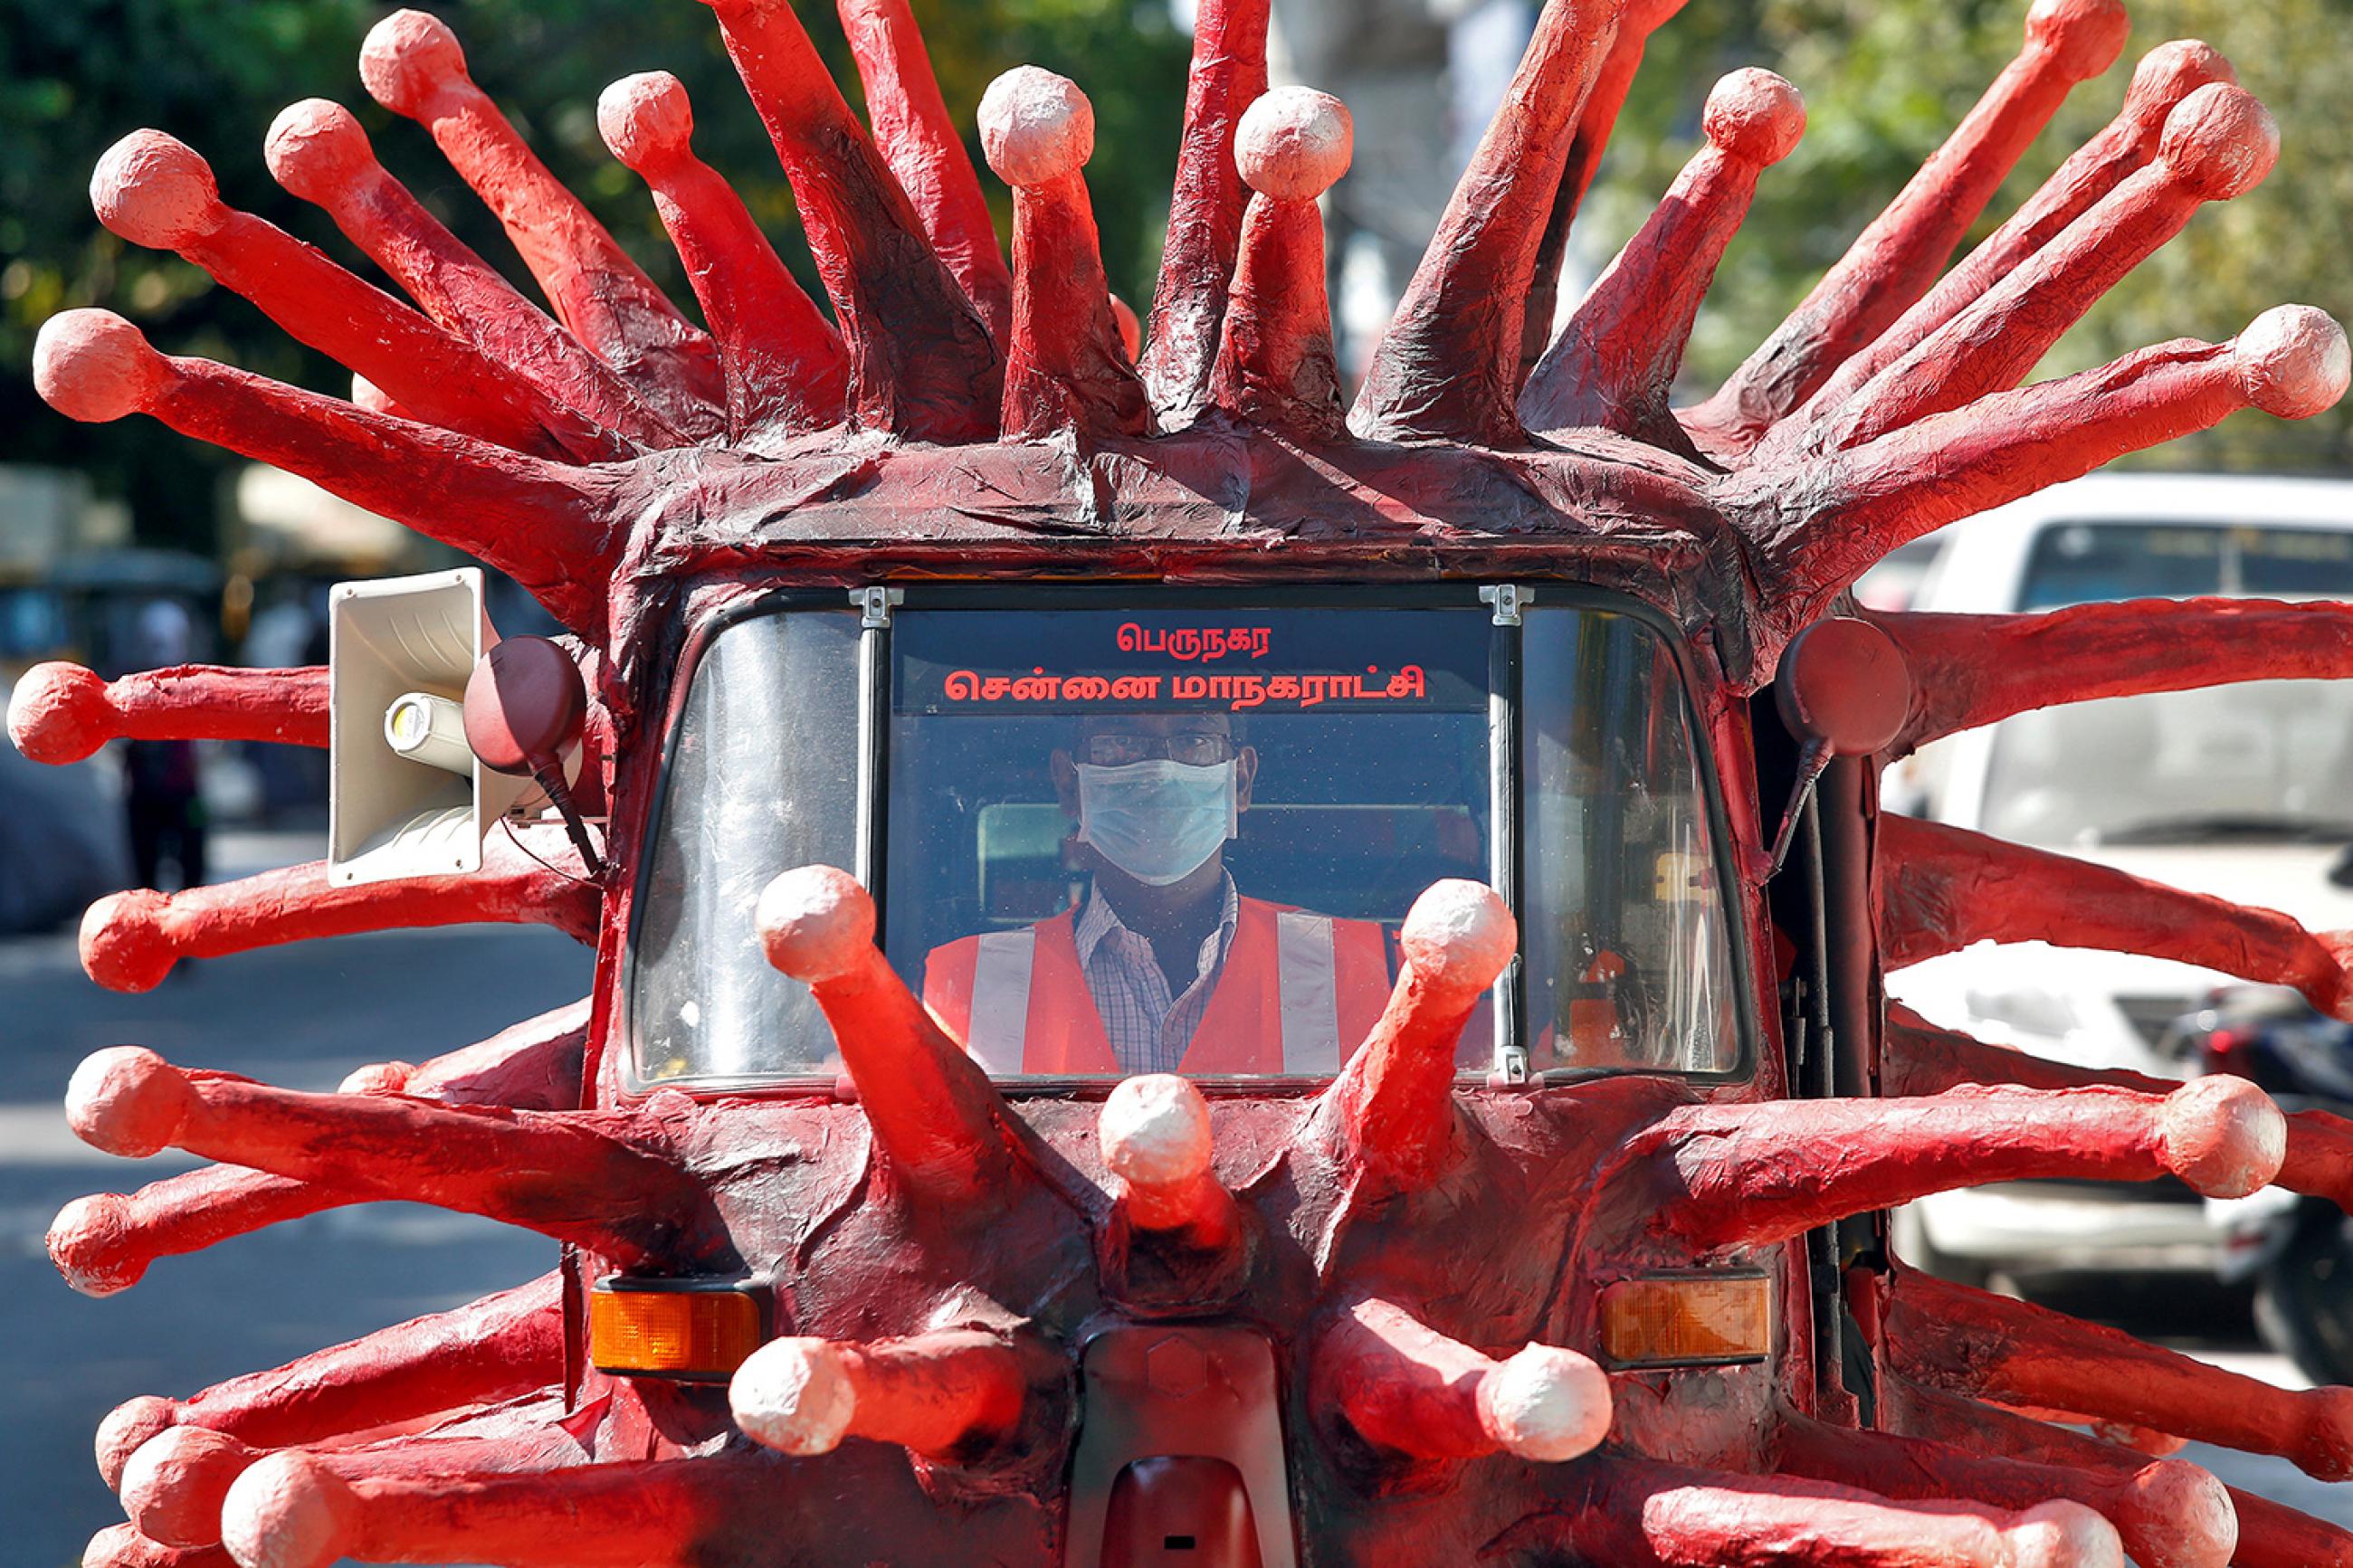 A man drives an auto-rickshaw depicting the coronavirus to create awareness about staying at home during a nationwide lockdown to prevent the spread of COVID-19—in Chennai, India, on April 23, 2020. The image shows a vehicle painted red and covered with crown spikes reminiscent of the virus, which appear to be made of paper mache. REUTERS/P. Ravikumar